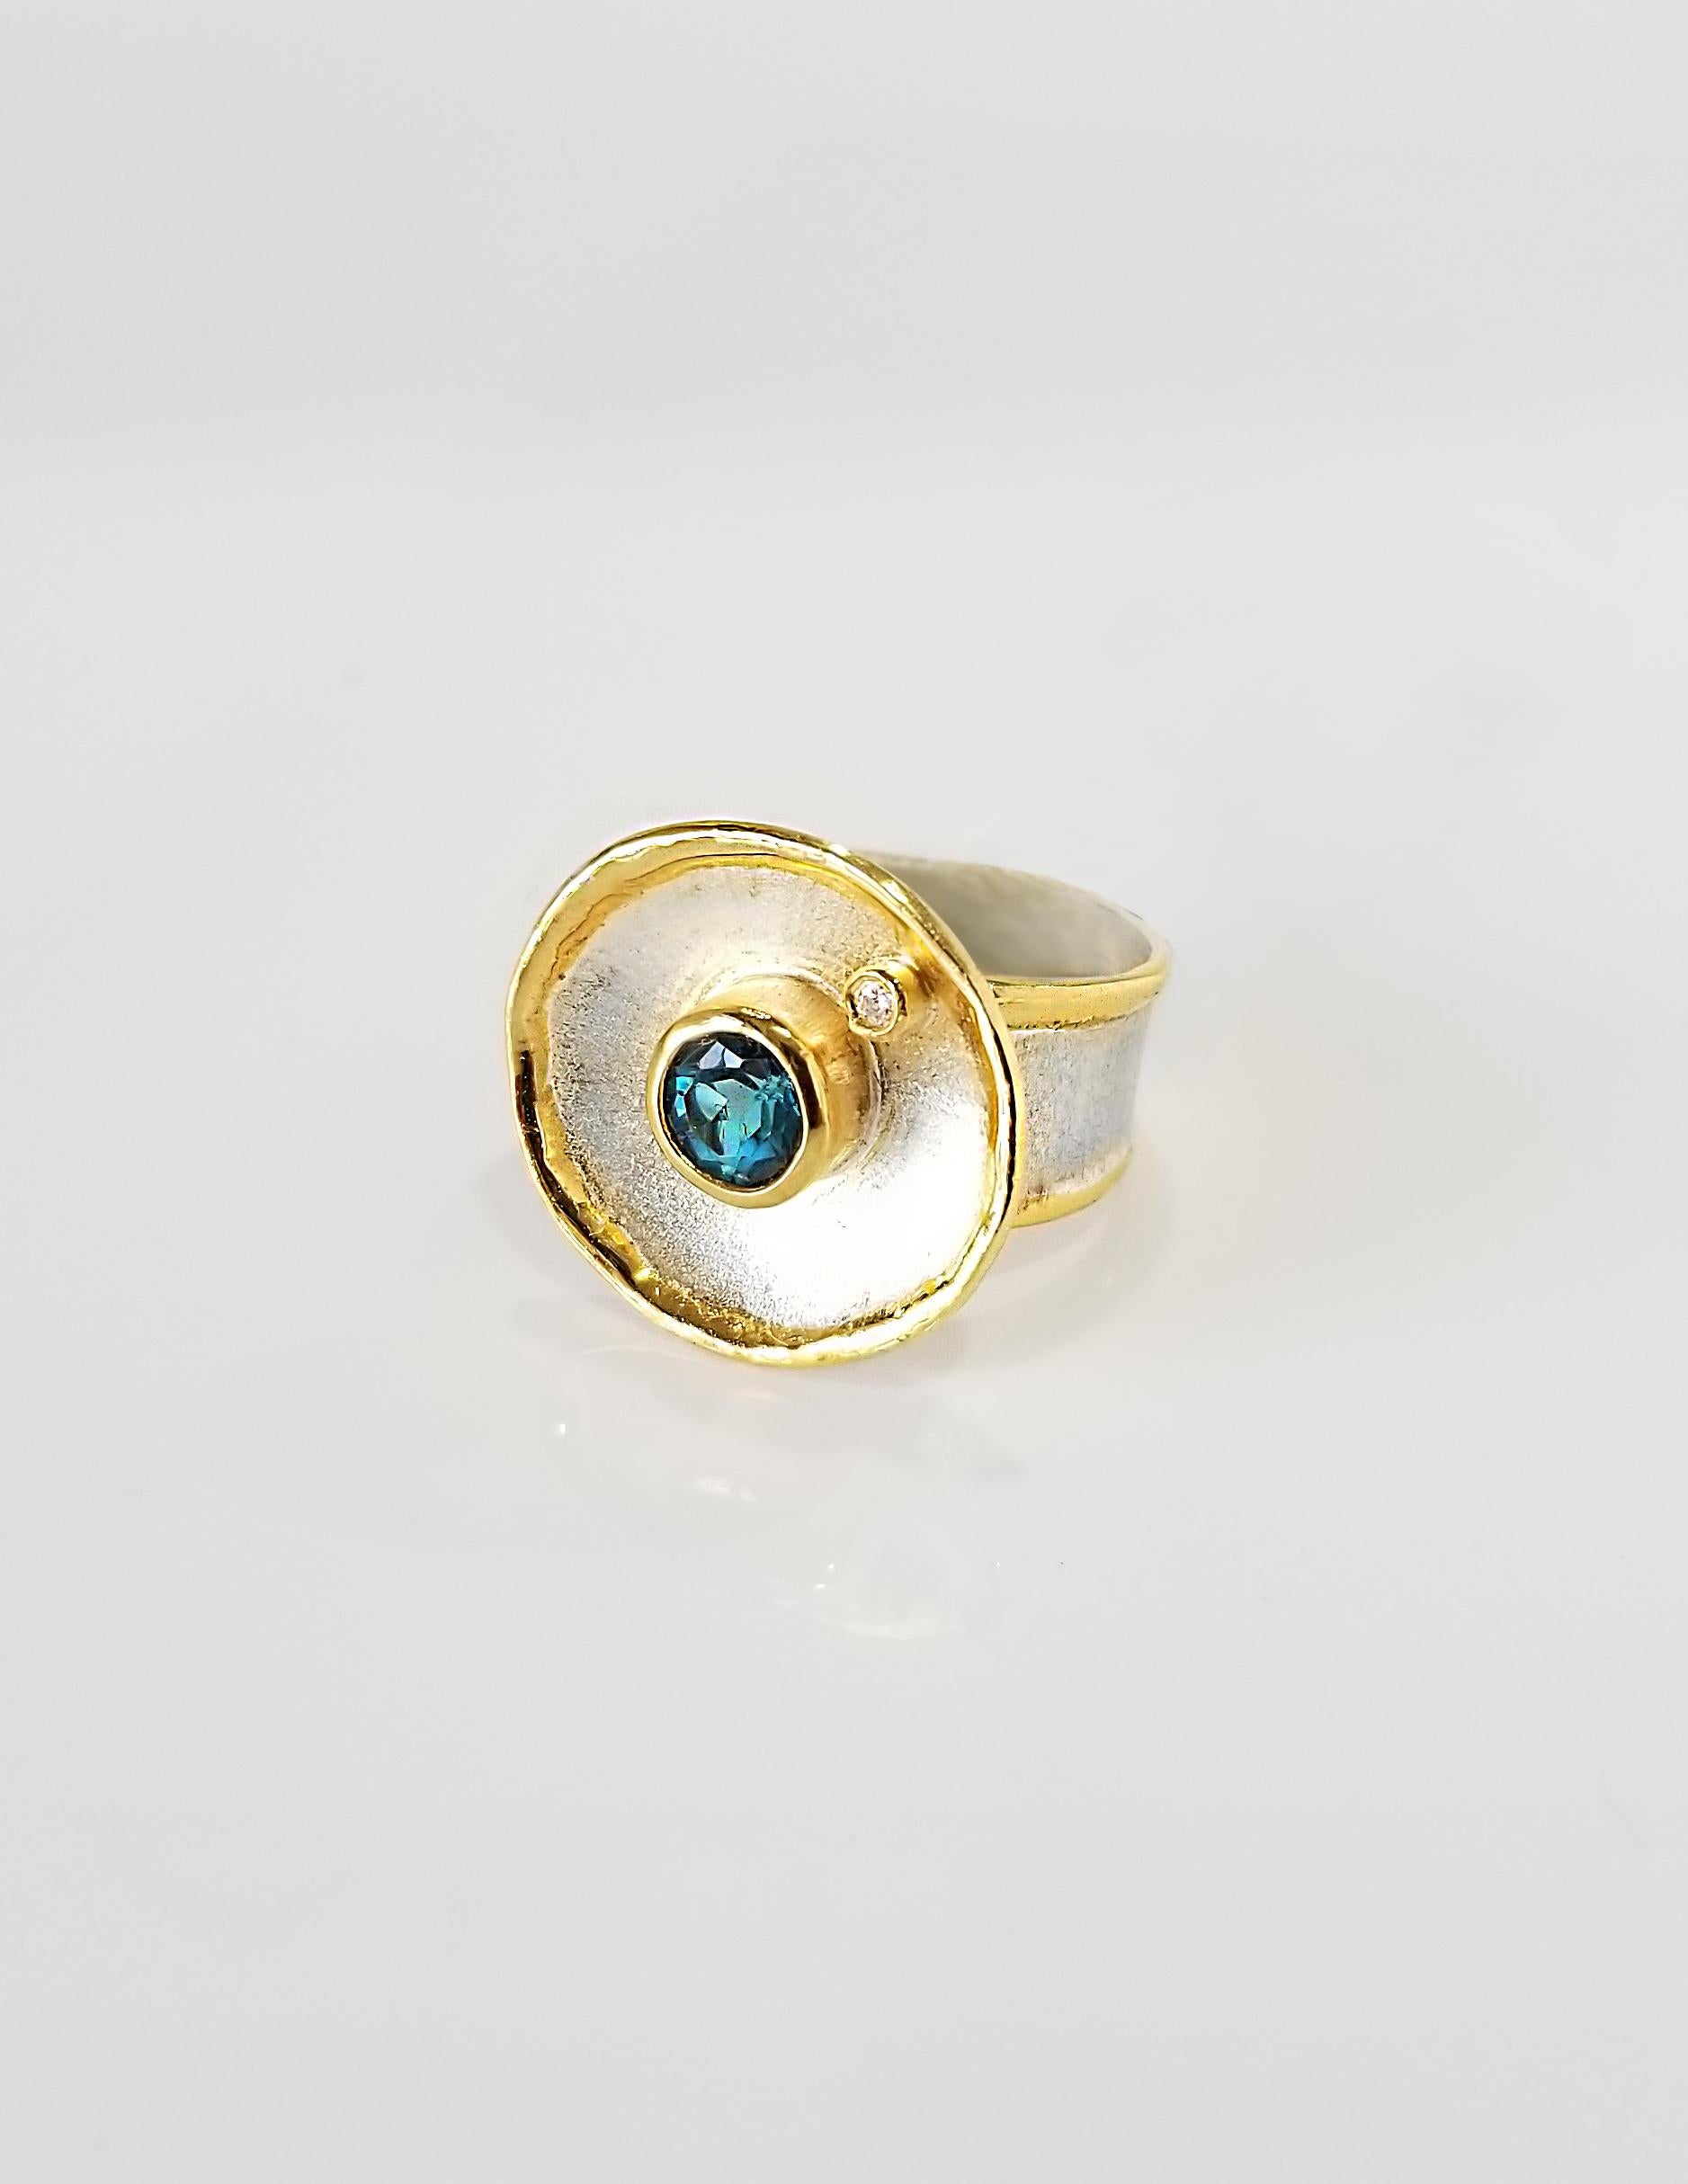 Yianni Creations 100% Handmade Ring from Fine Silver with a layover of 24 Karat Yellow Gold features 1.55 Carat London Blue Topaz accompanied by 0.03 Carat Diamond complimented by unique techniques of craftsmanship - brushed texture and